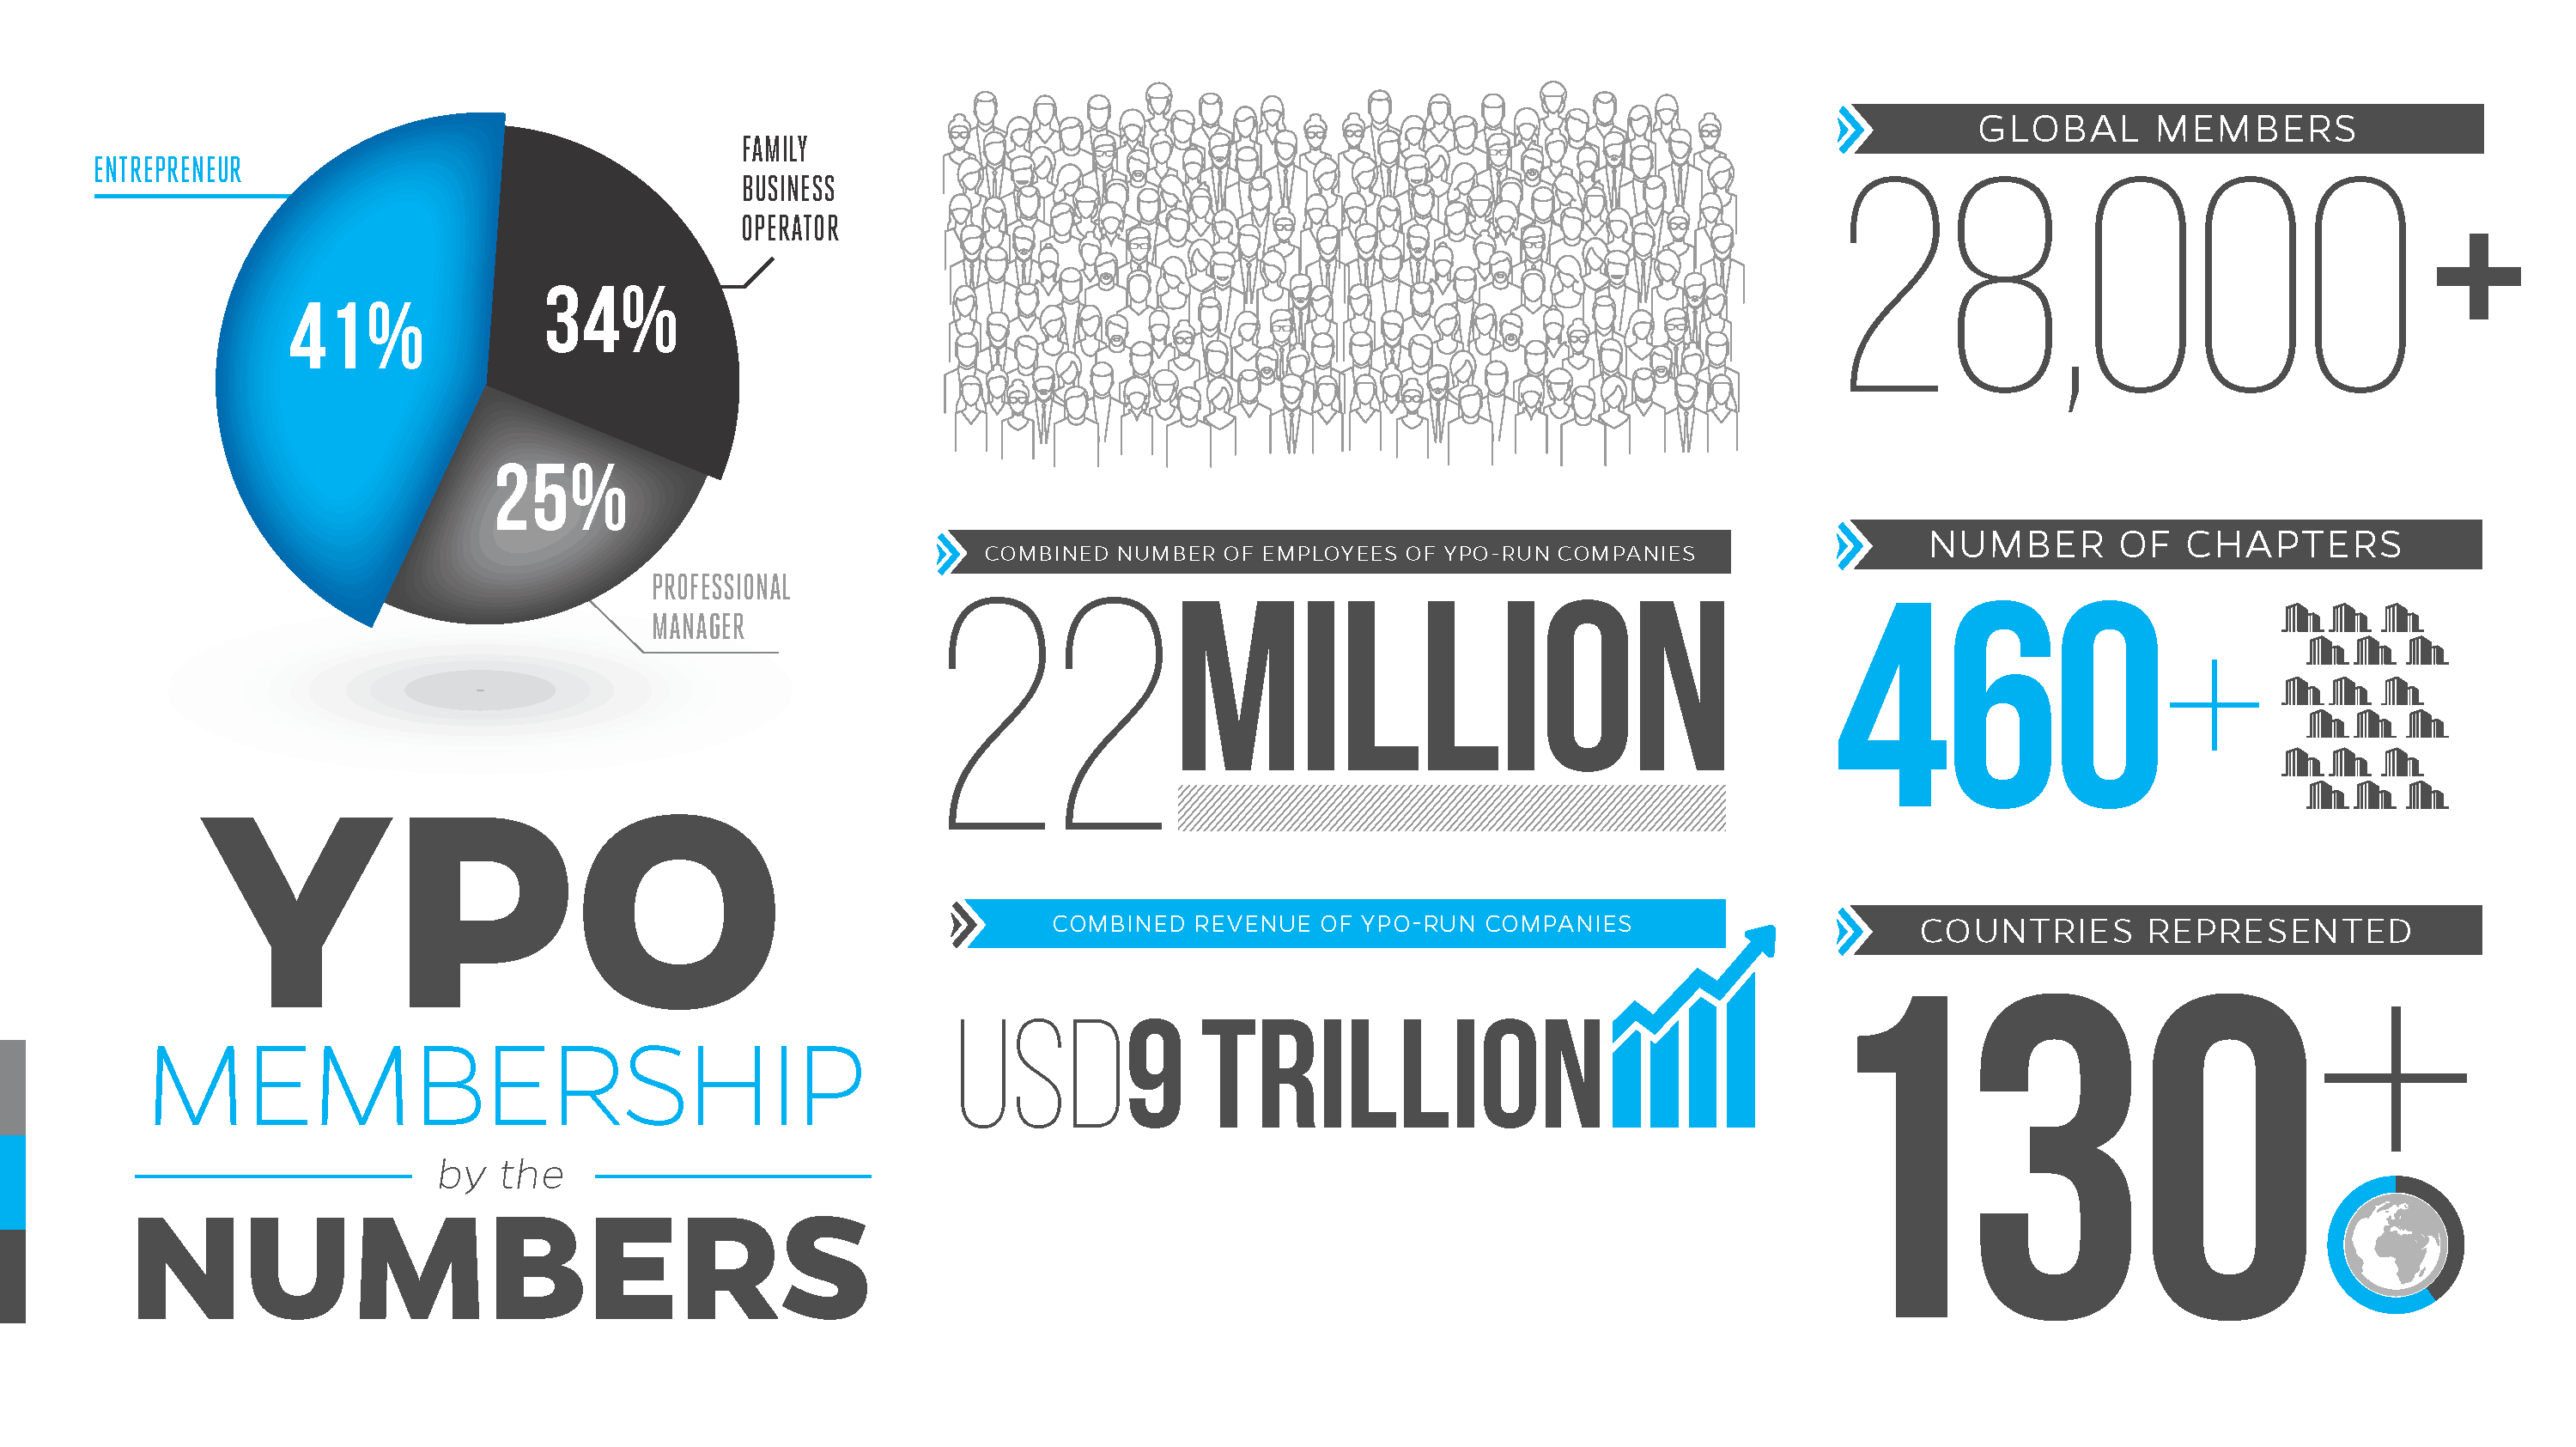 Breadth and Depth: YPO Networks by the Numbers